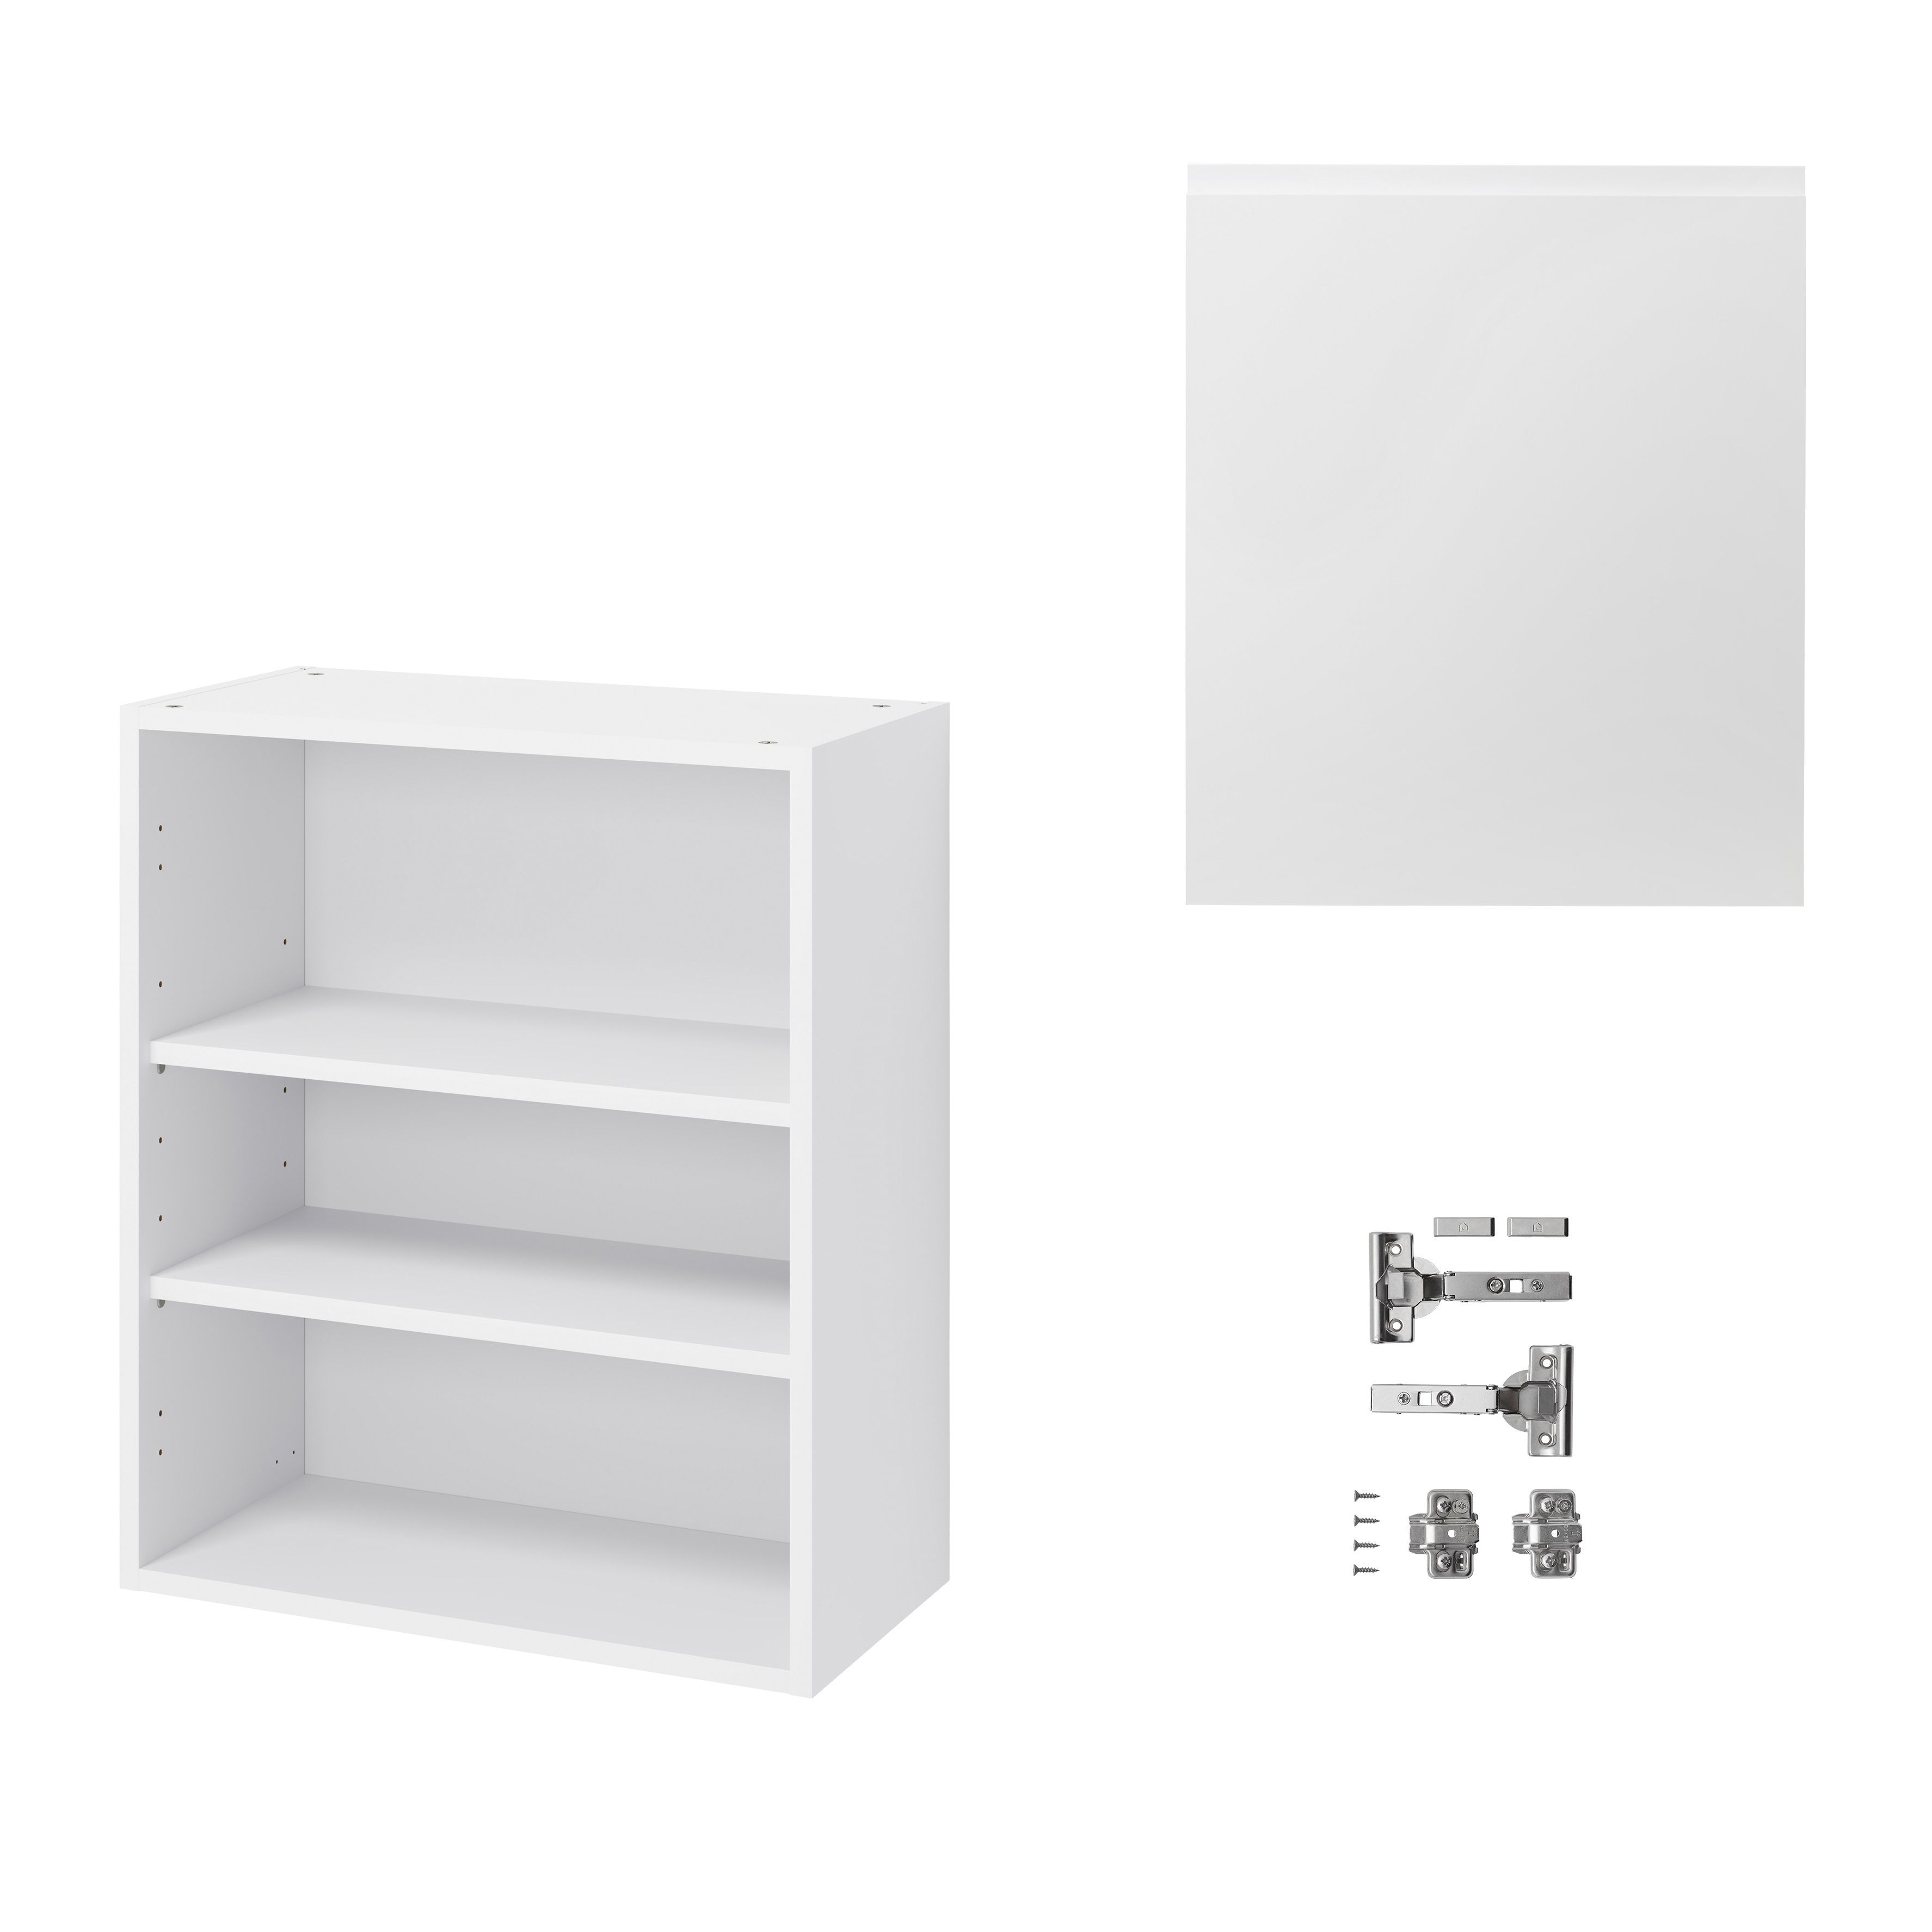 GoodHome Garcinia Gloss white integrated handle Wall Kitchen cabinet (W)600mm (H)720mm